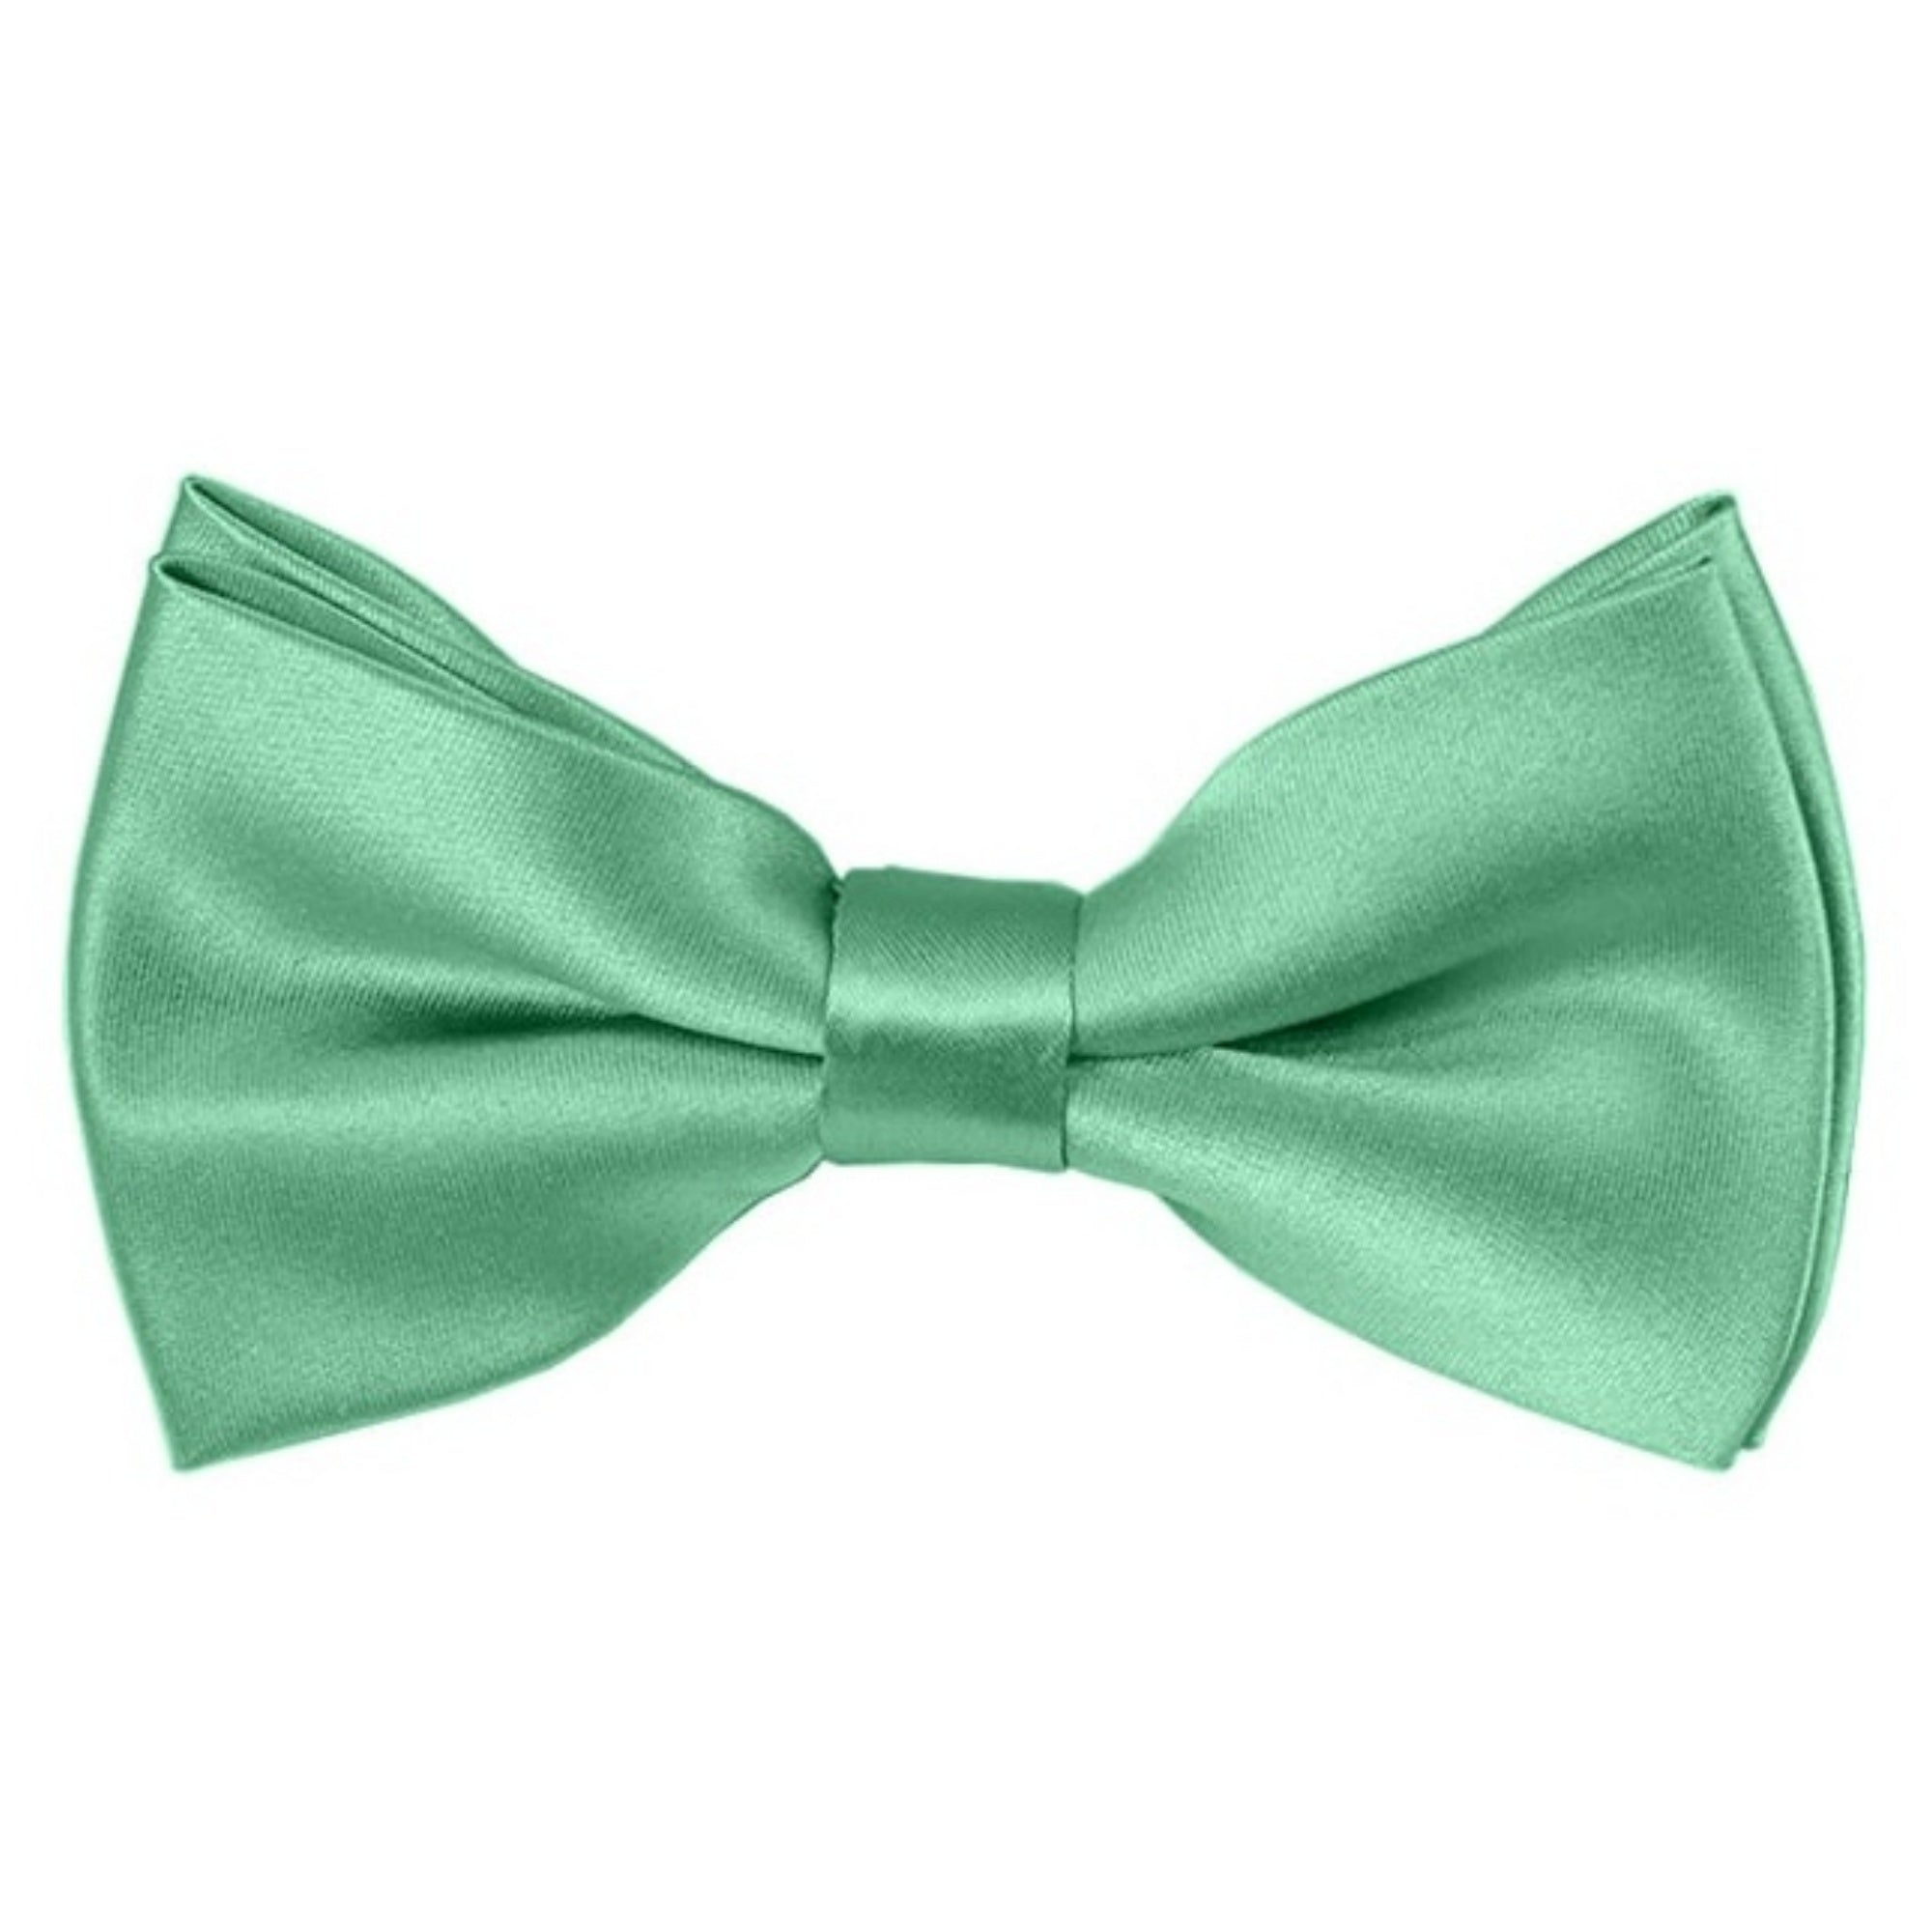 TheDapperTie Men's Solid Color 2.5 W And 4.5 L Inch Pre-Tied adjustable Bow Ties Men's Solid Color Bow Tie TheDapperTie Mint Green  